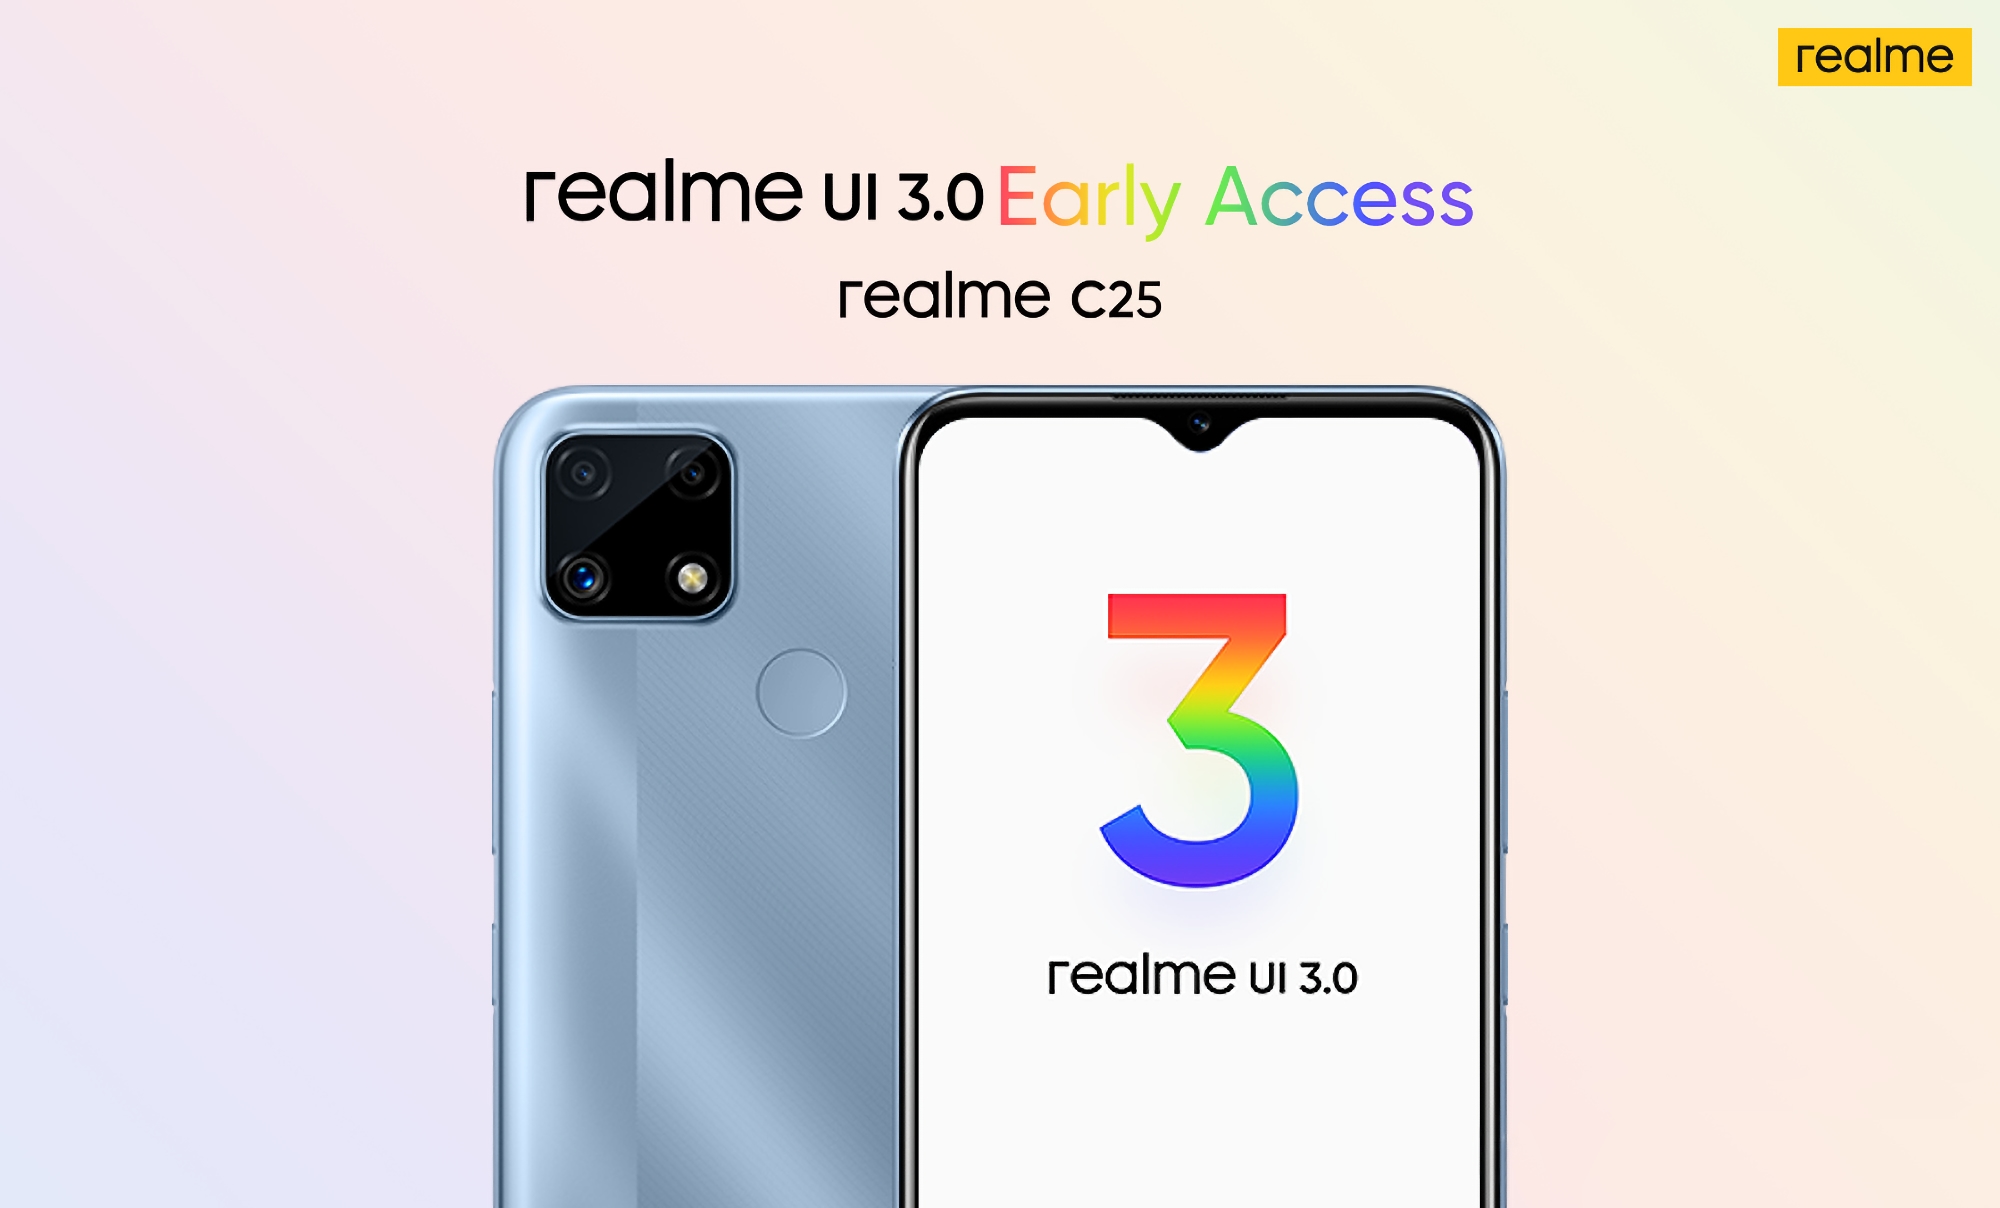 realme C25 gets Android 12 beta with realme UI 3.0 skin